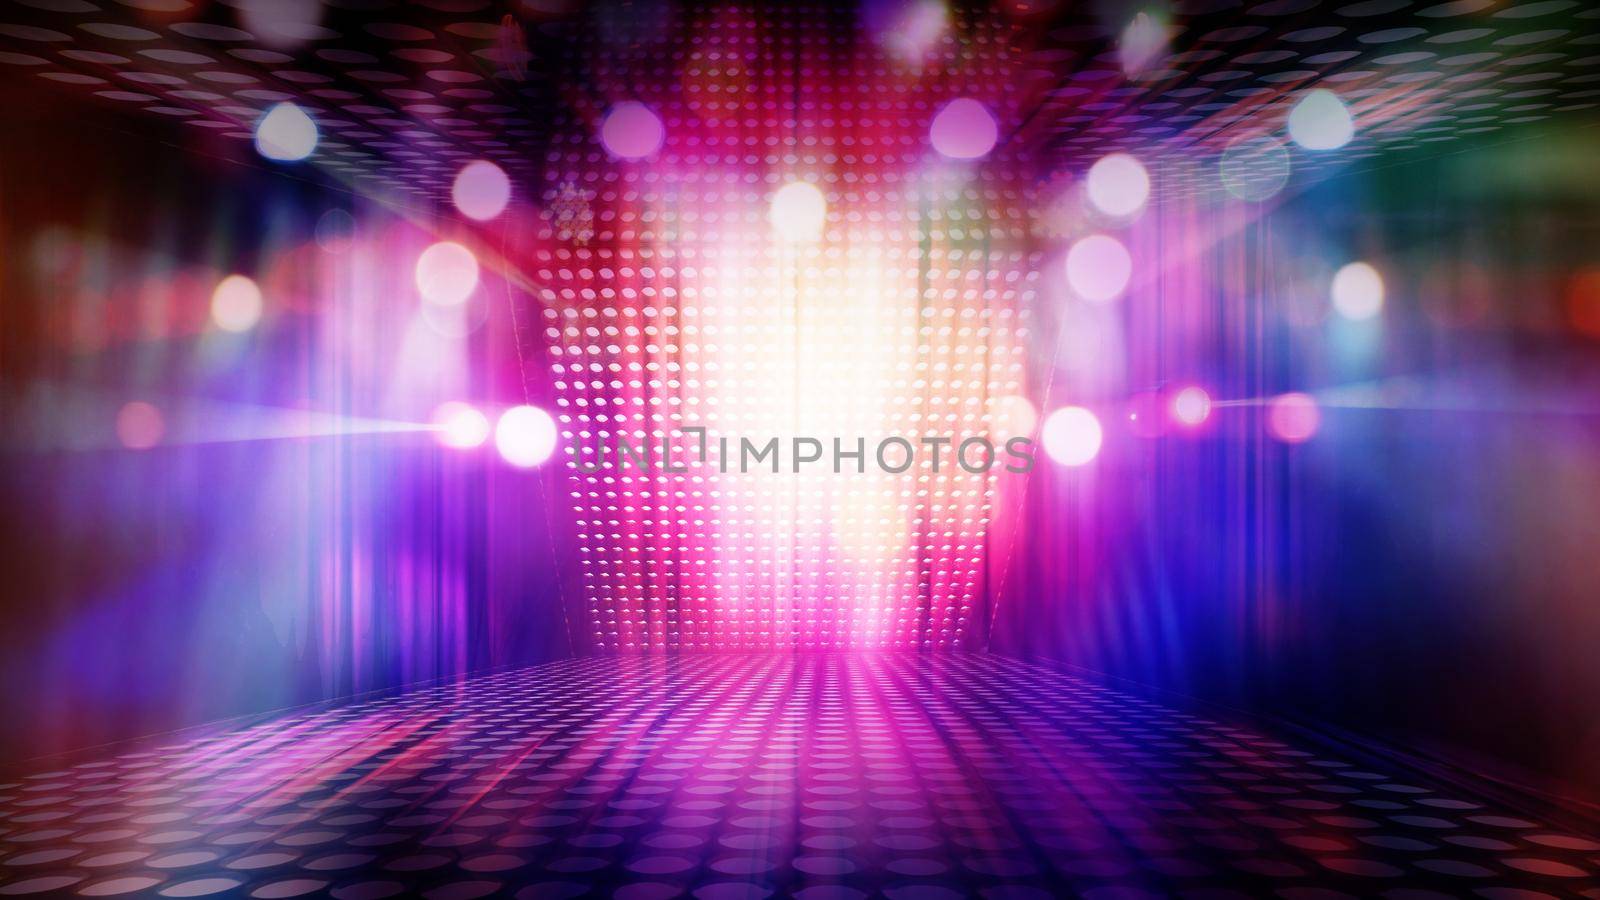 blurred empty theater stage with fun colourful spotlights, abstract image of concert lighting illumination background